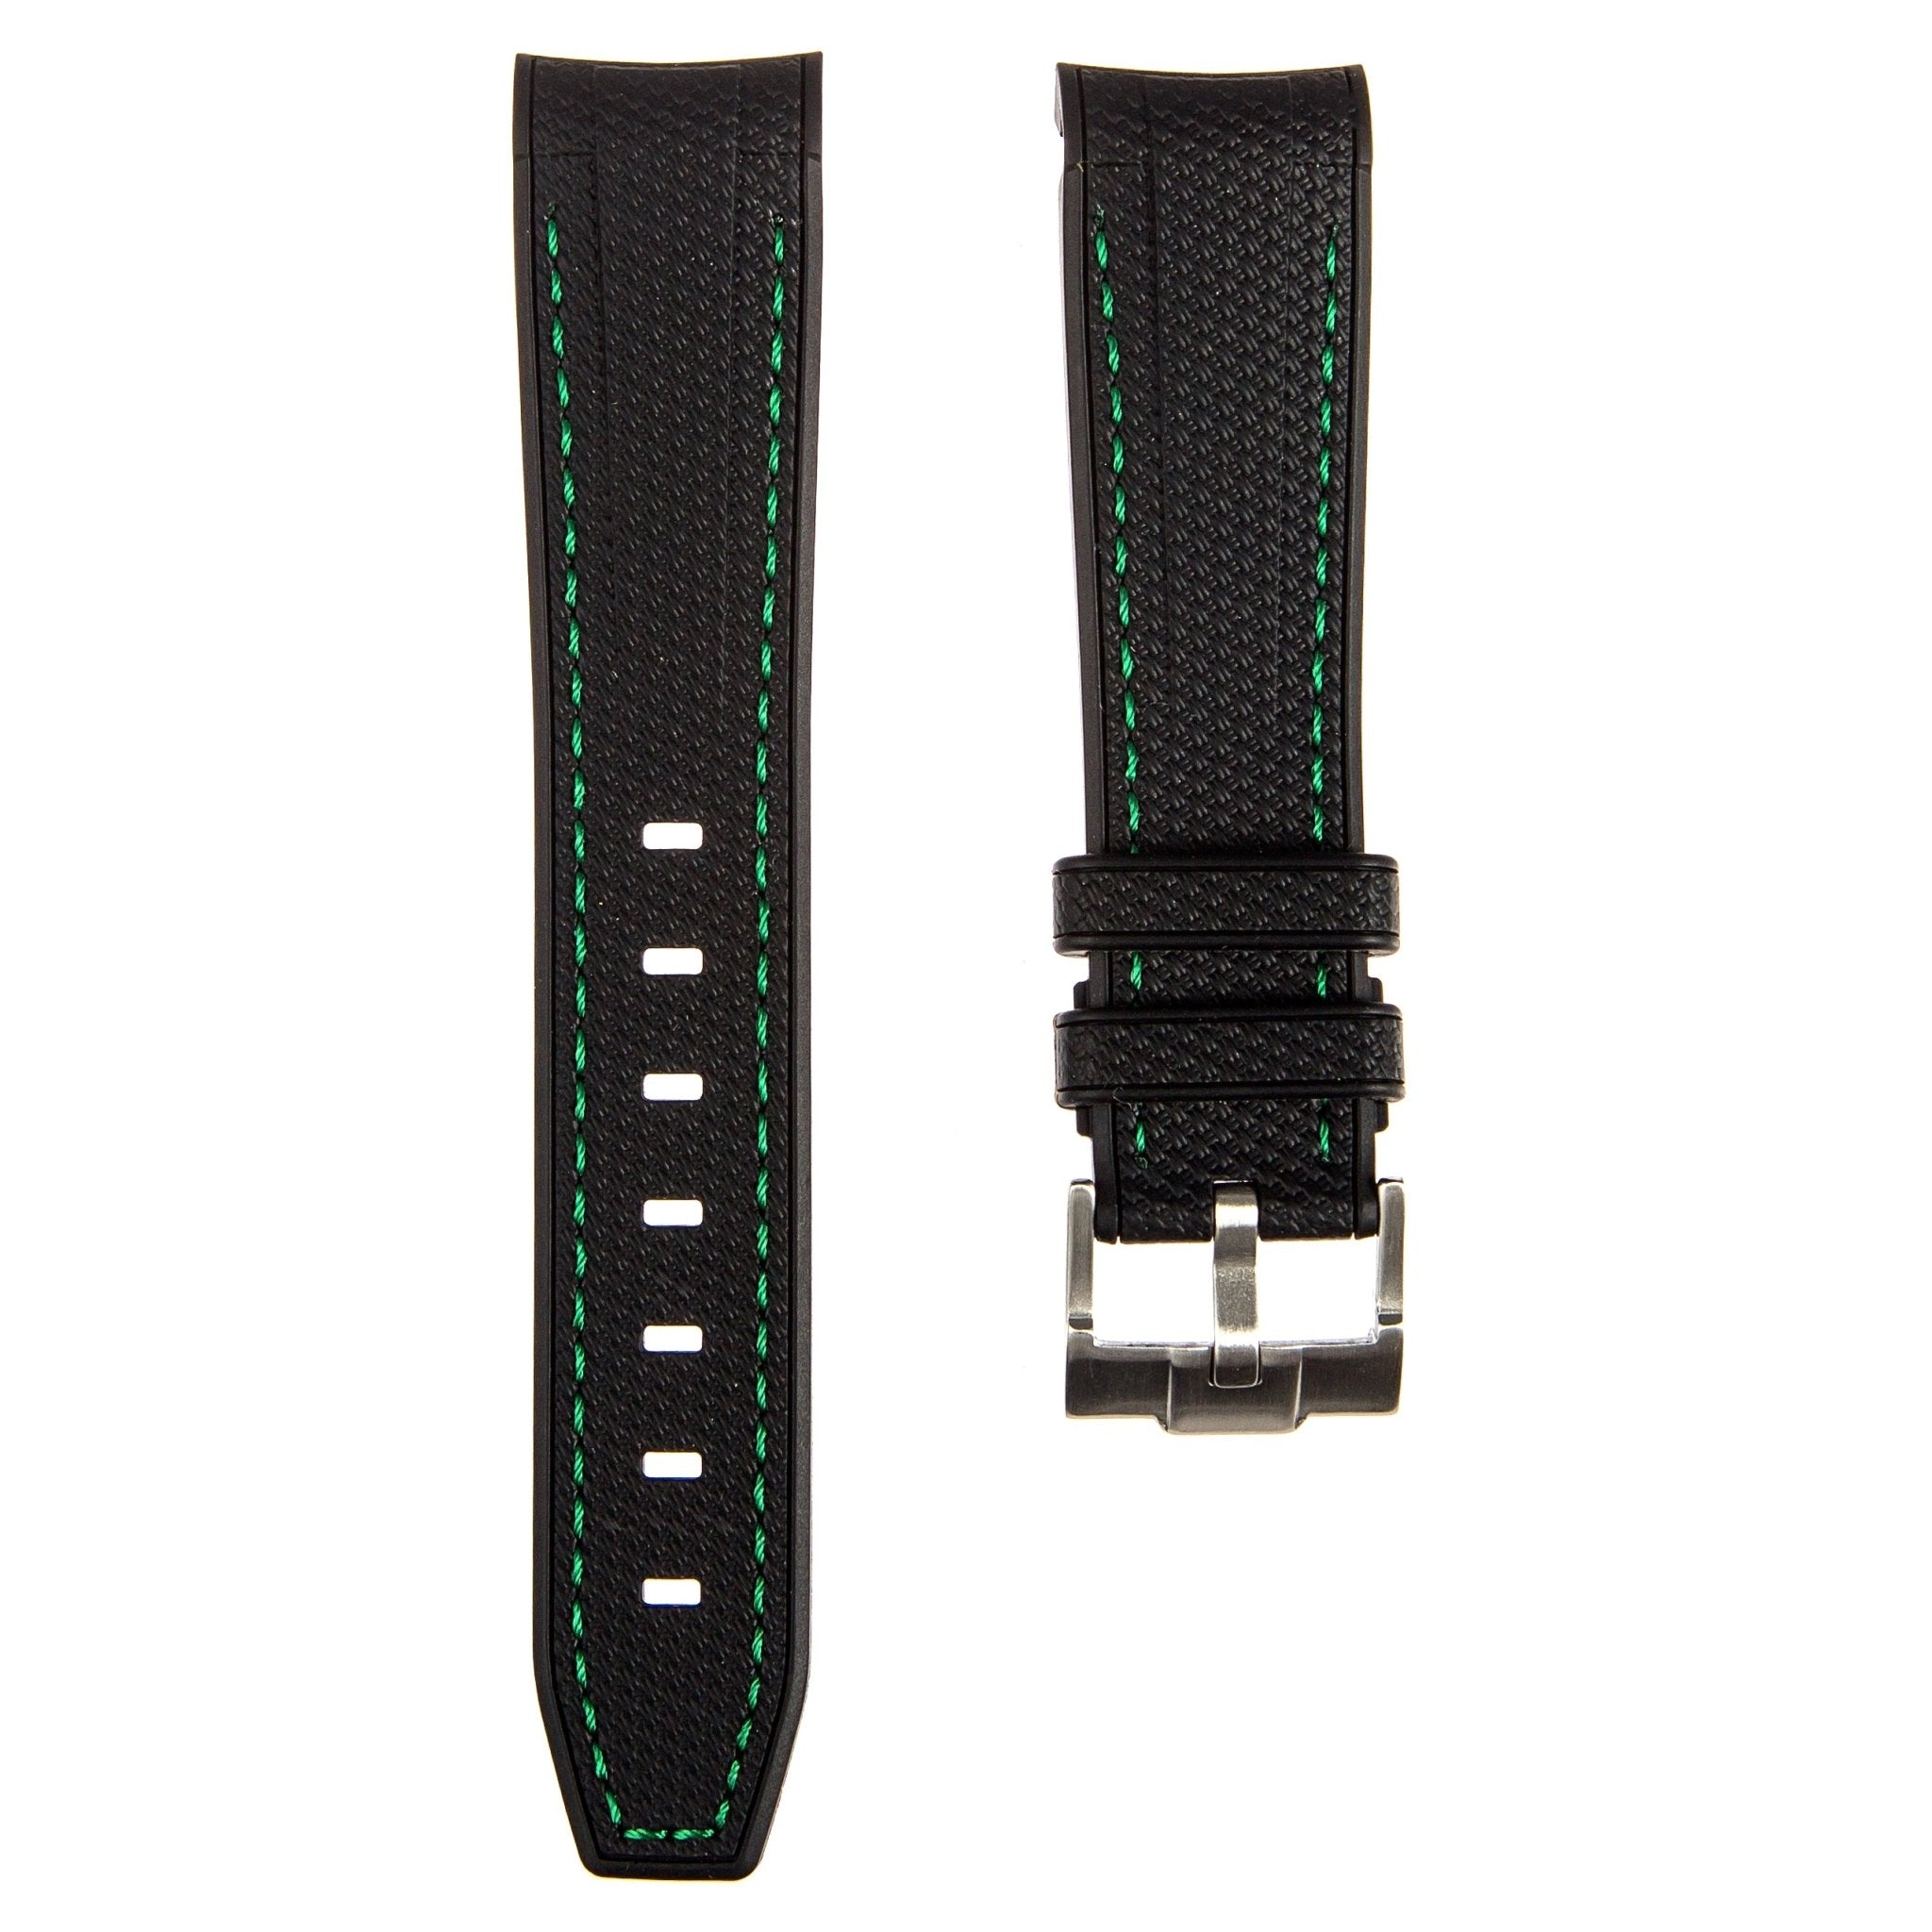 Textured Curved End Premium Silicone Strap - Compatible with Omega Moonwatch - Black with Green Stitch (2405) -StrapSeeker